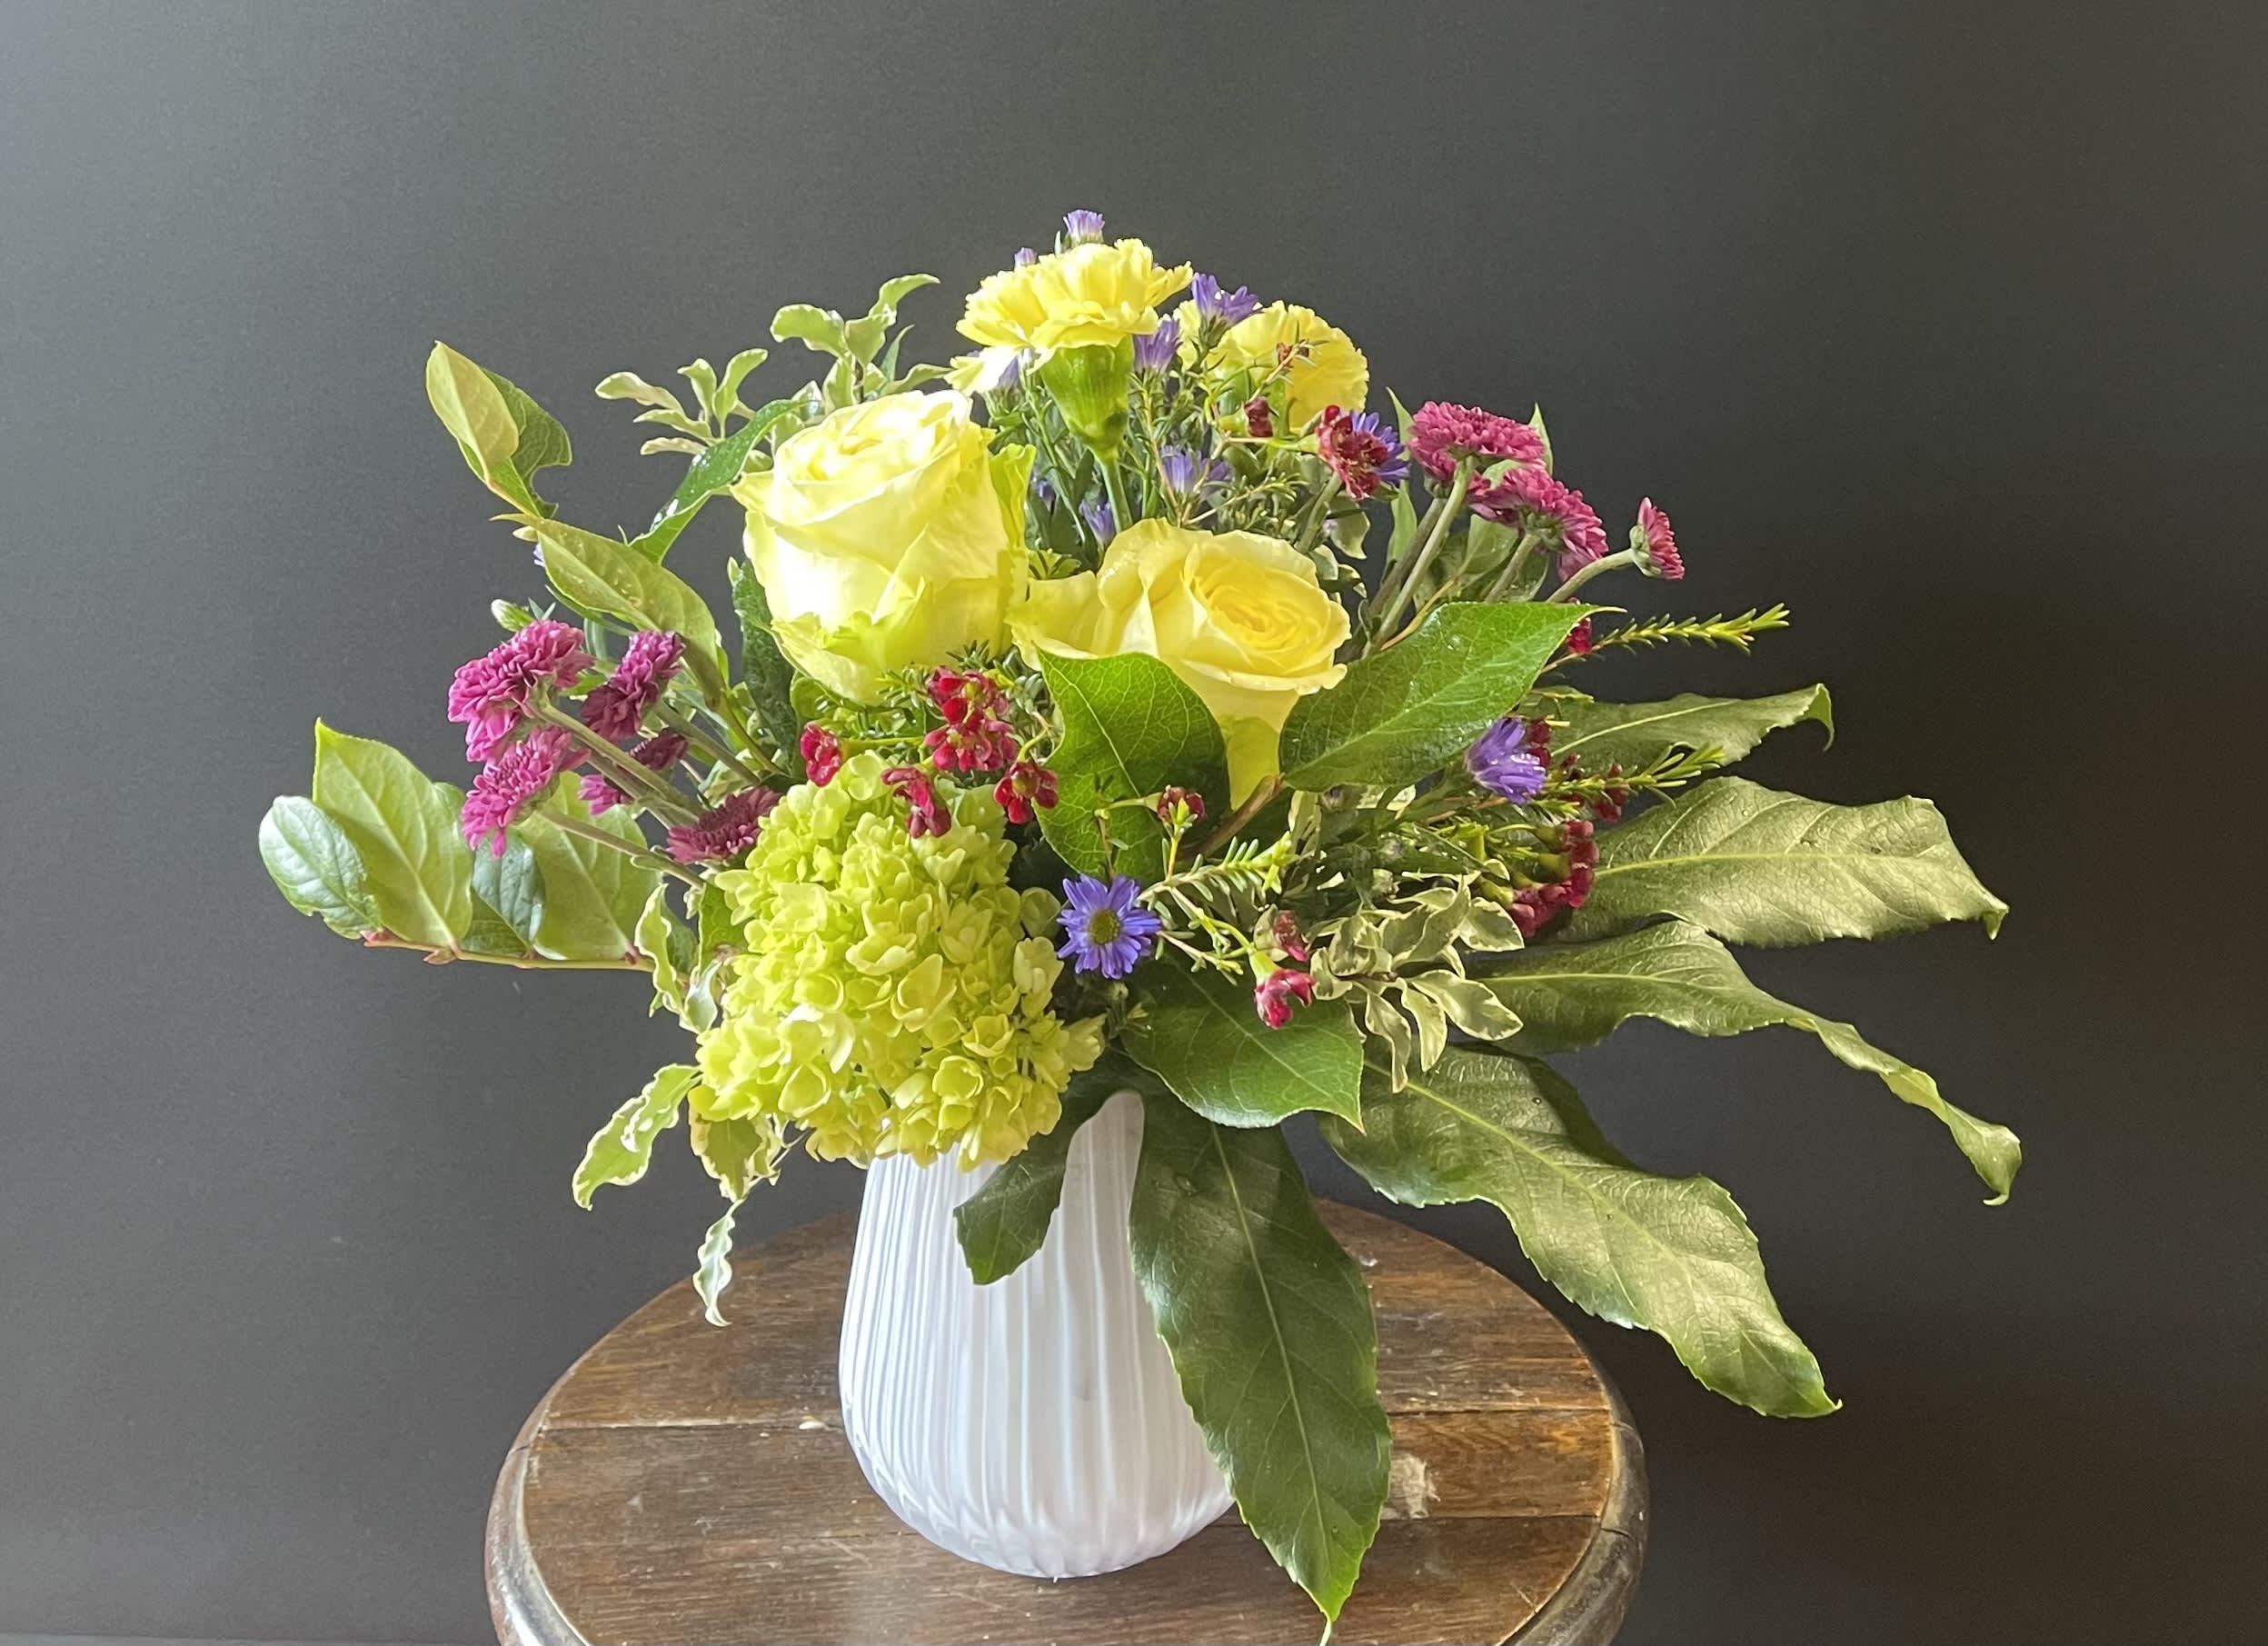 Spring is in the Air Bouquet - Bright and cheery bouquet in a sweet little vessel, sure to brighten anyone’s day!